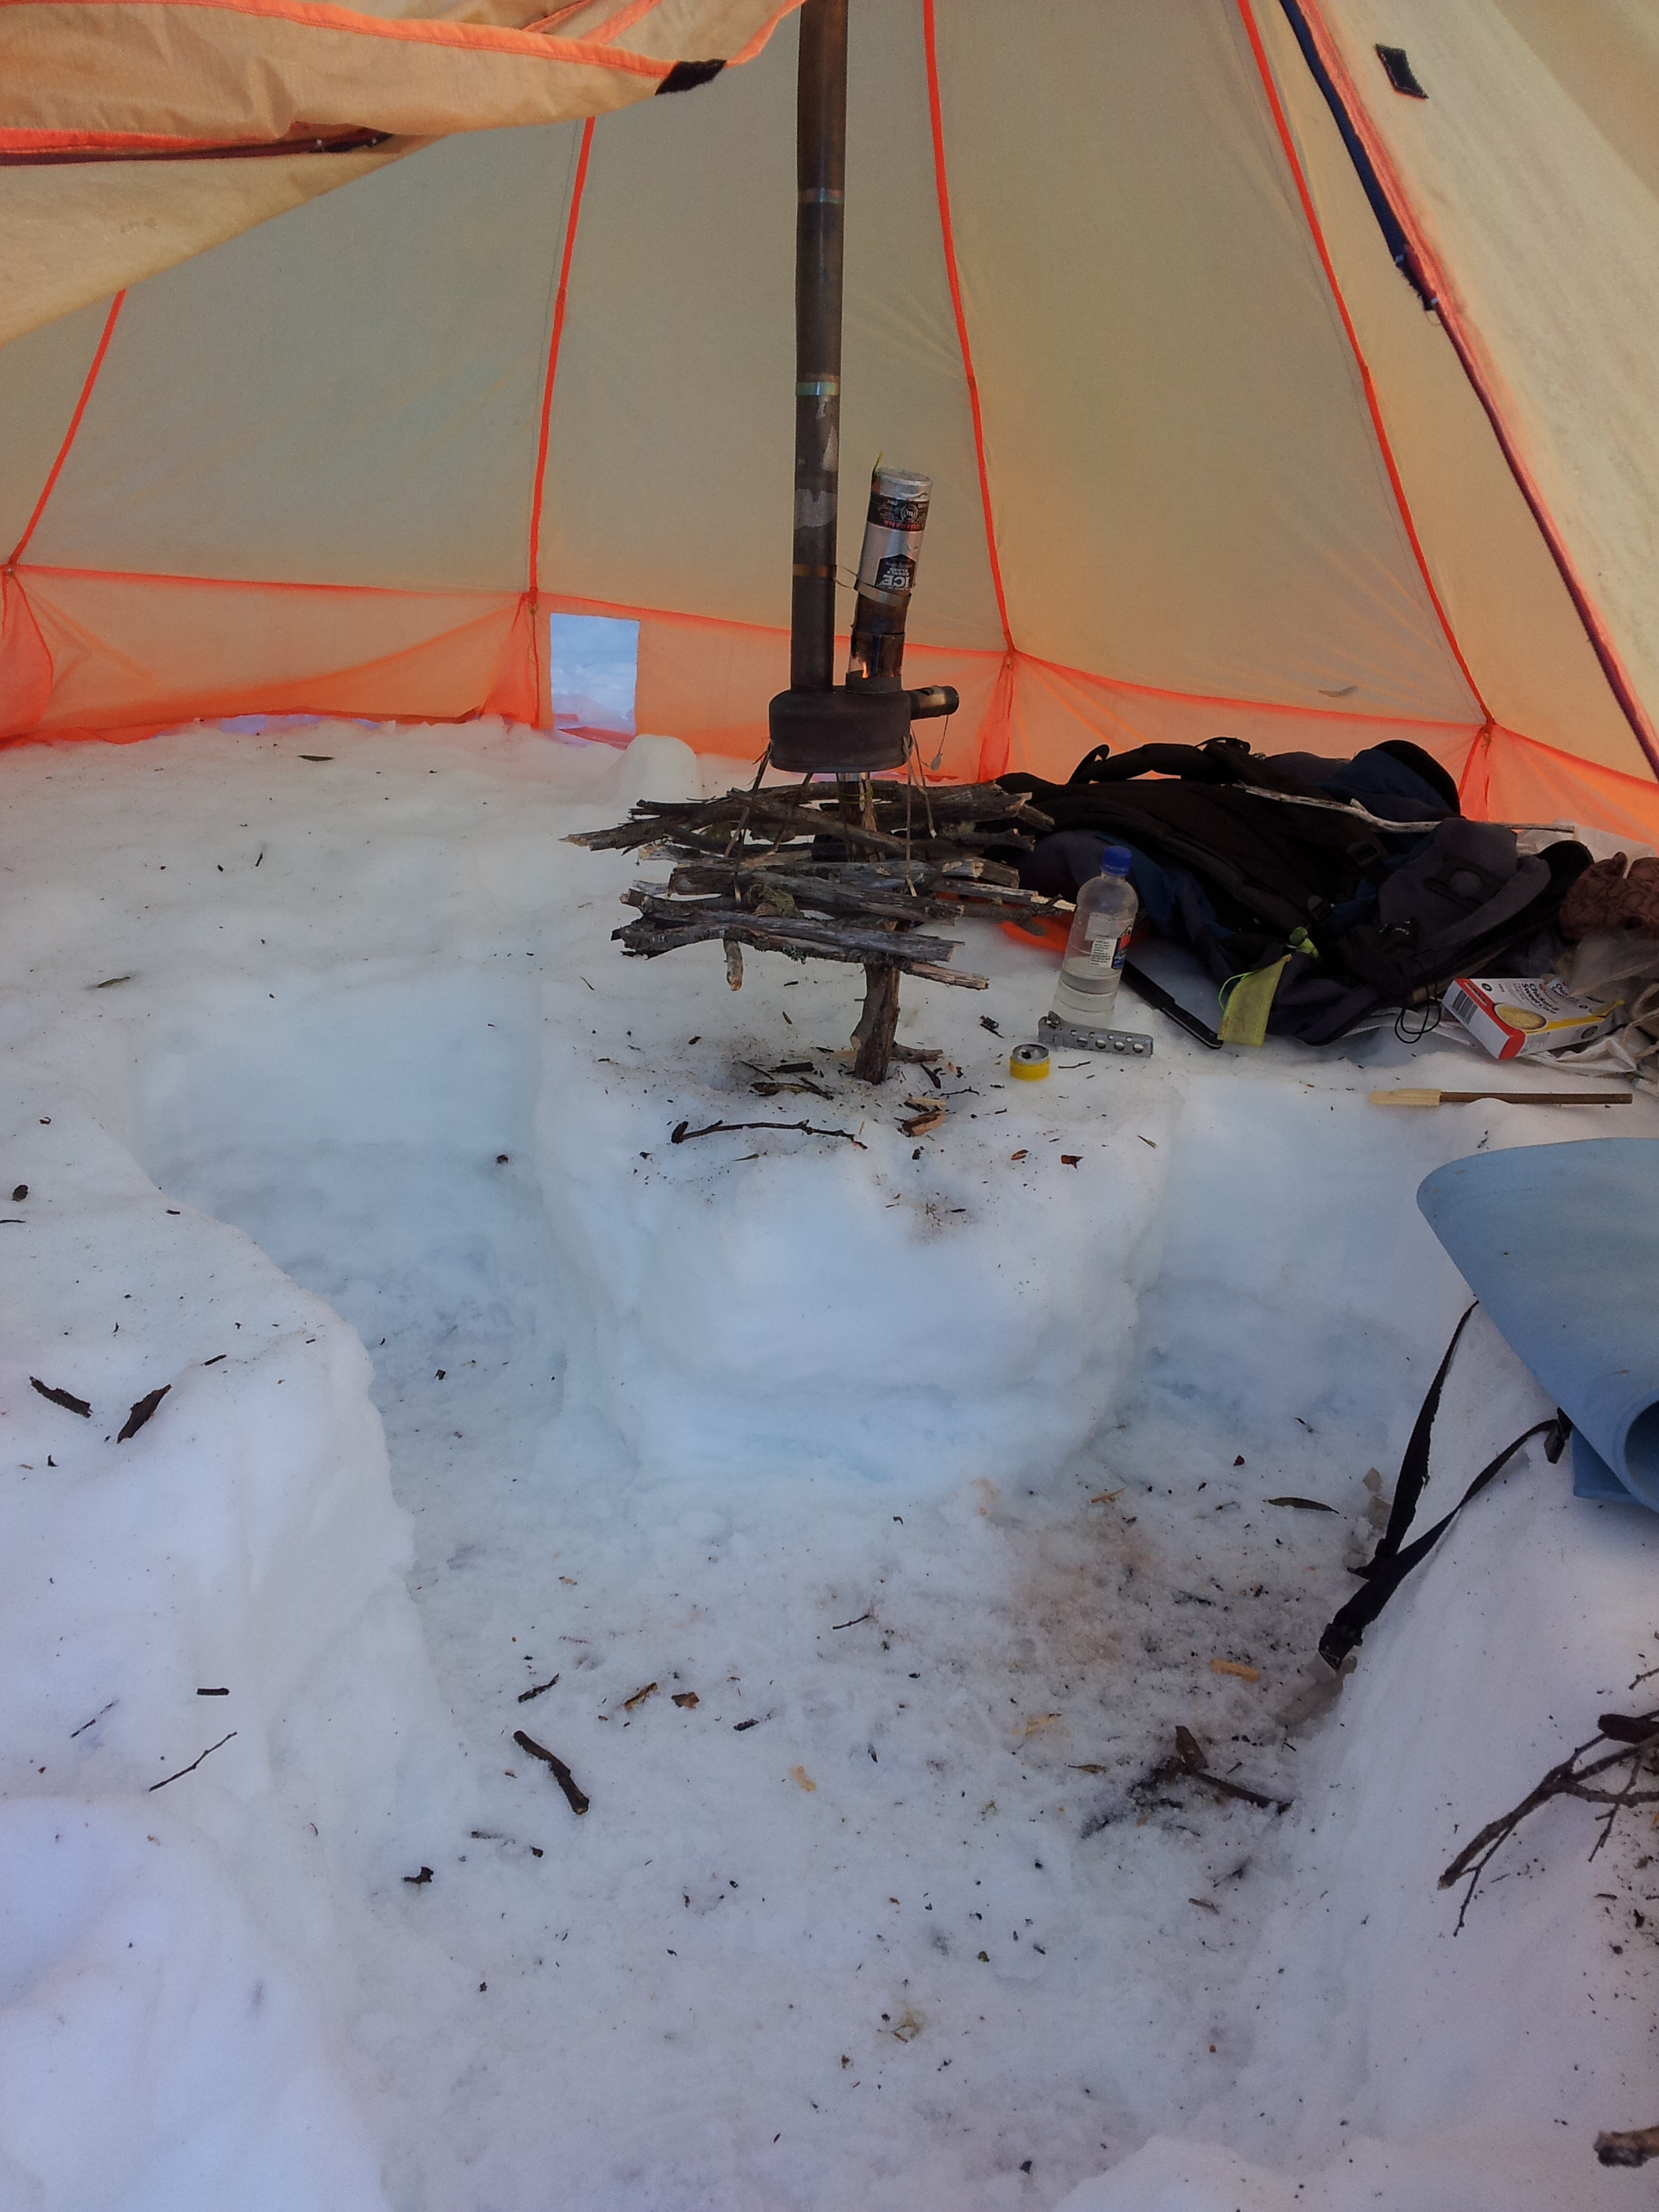 Y-Shaped Snow Pit, Tim Clarke, Micro Wood Stove, Alpine/Snow Camping, Part 4